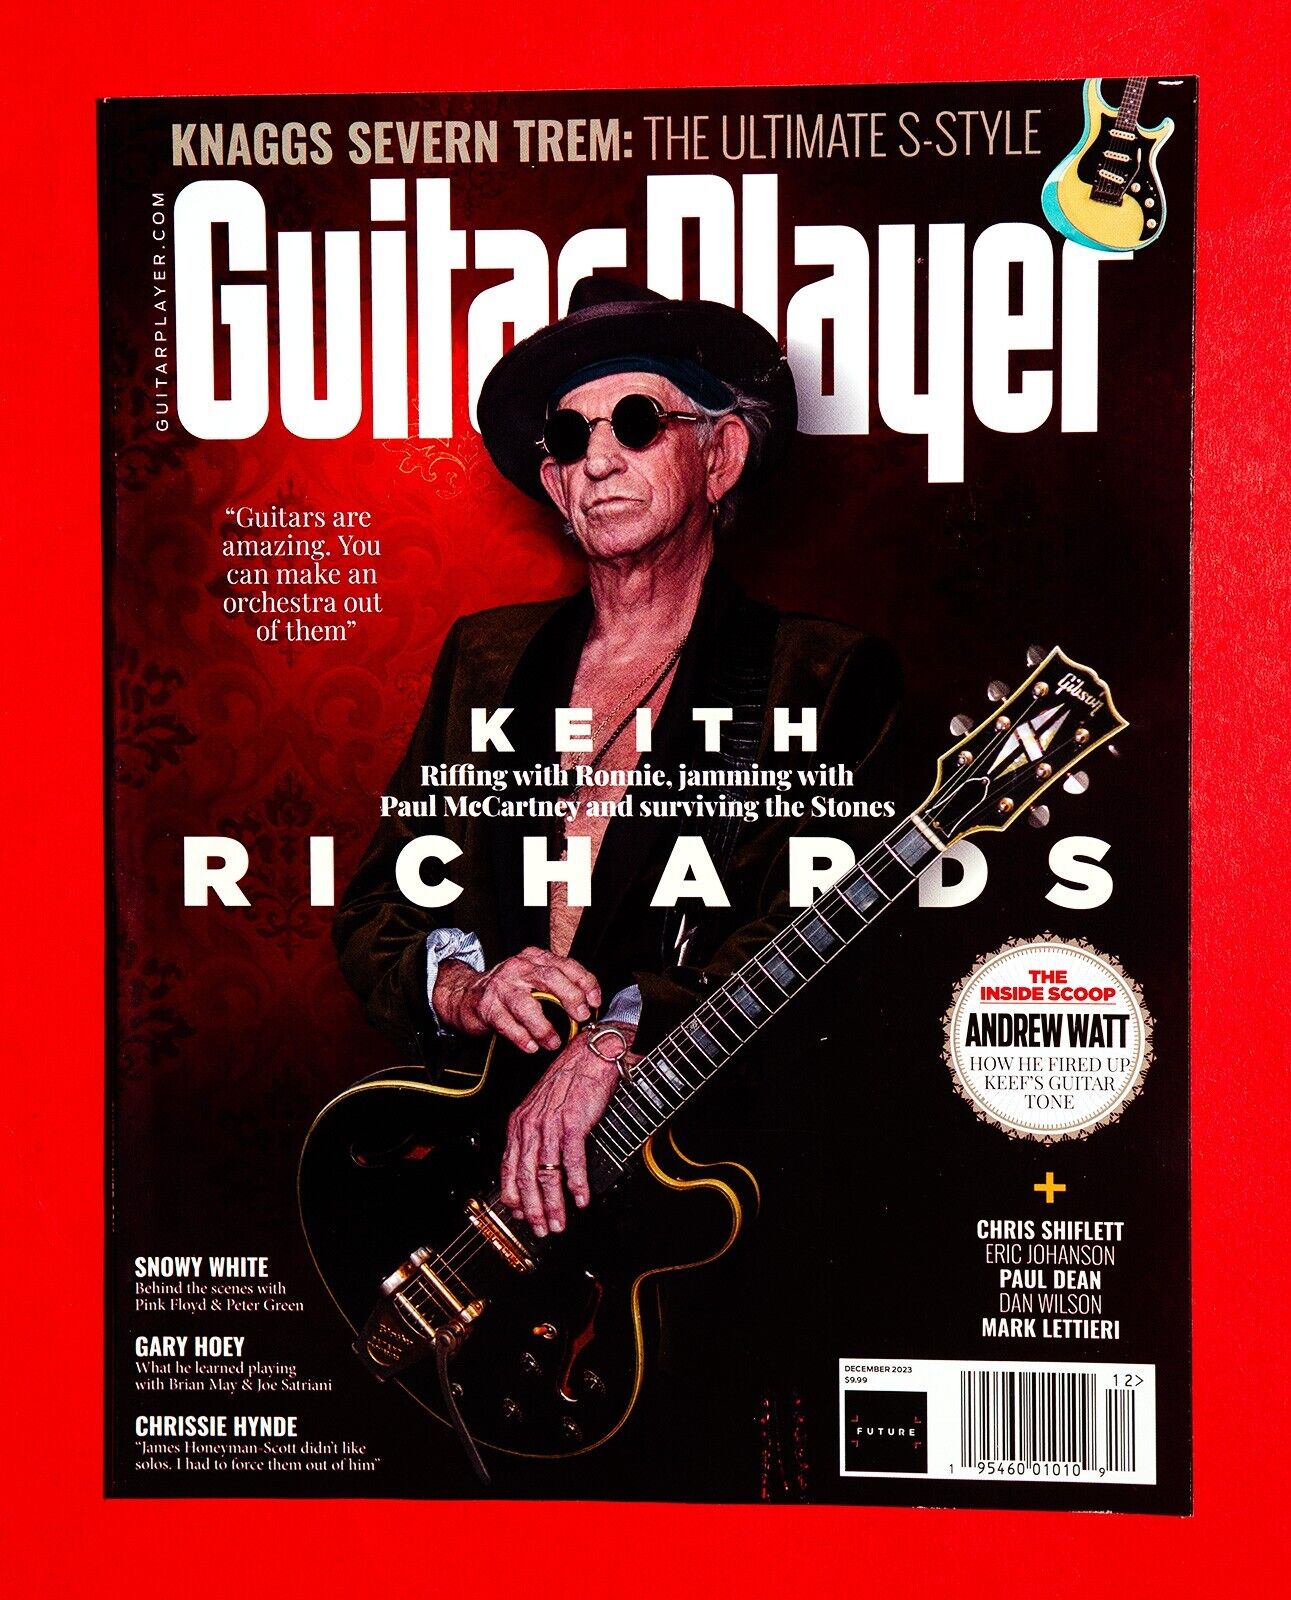 Keith Richard: The Rolling Stone Interview